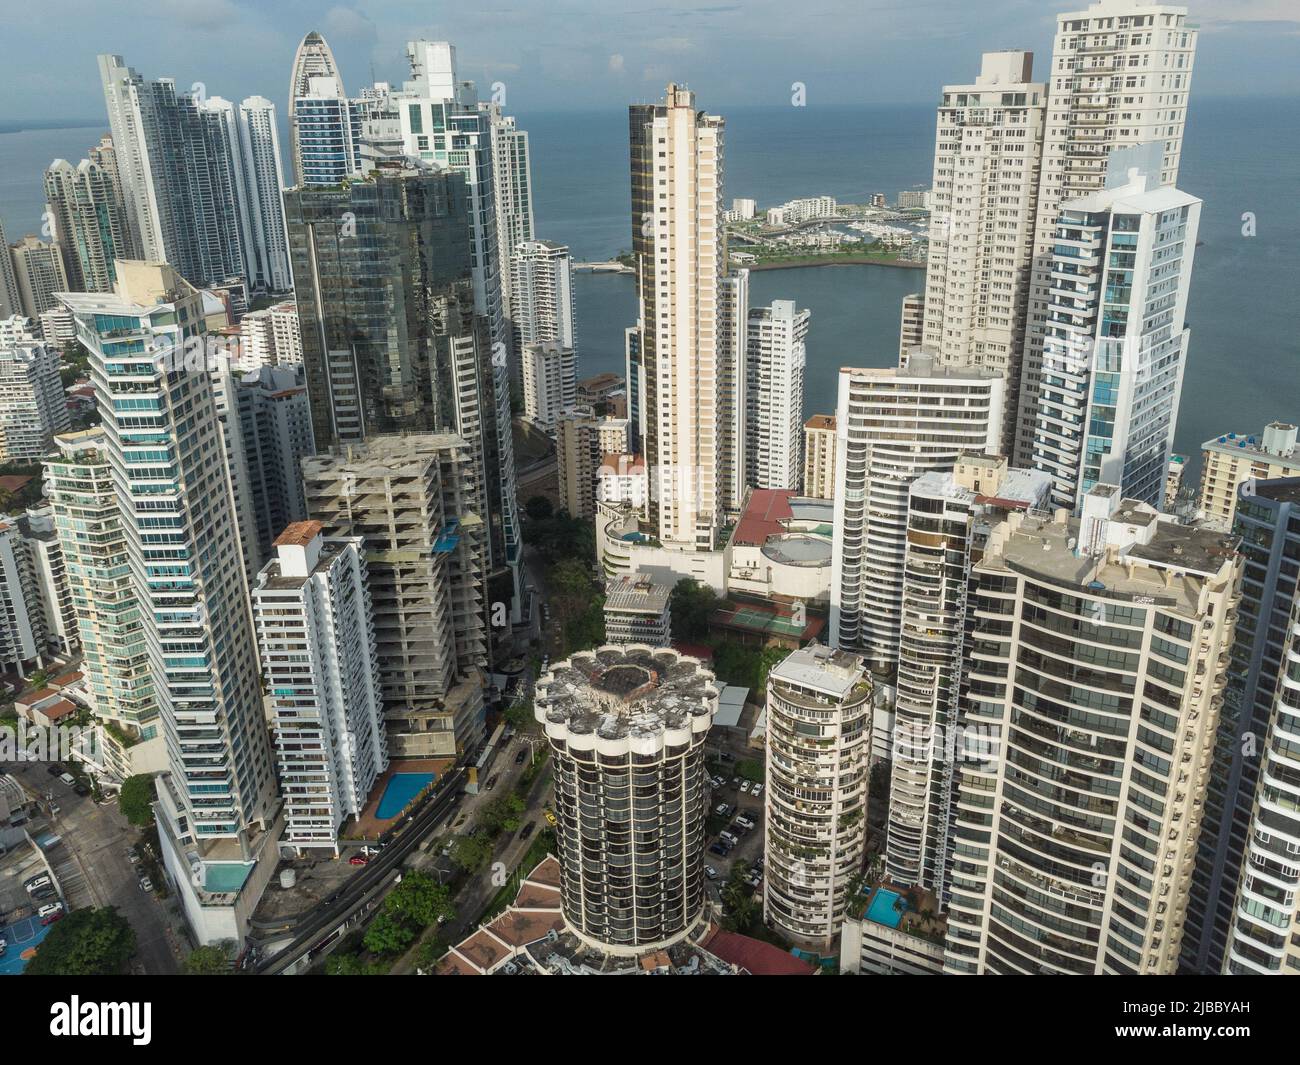 Panama City: Aerial view of hotels and condo towers in the Punta Paitilla luxury residential district in Panama city in Central America. Stock Photo